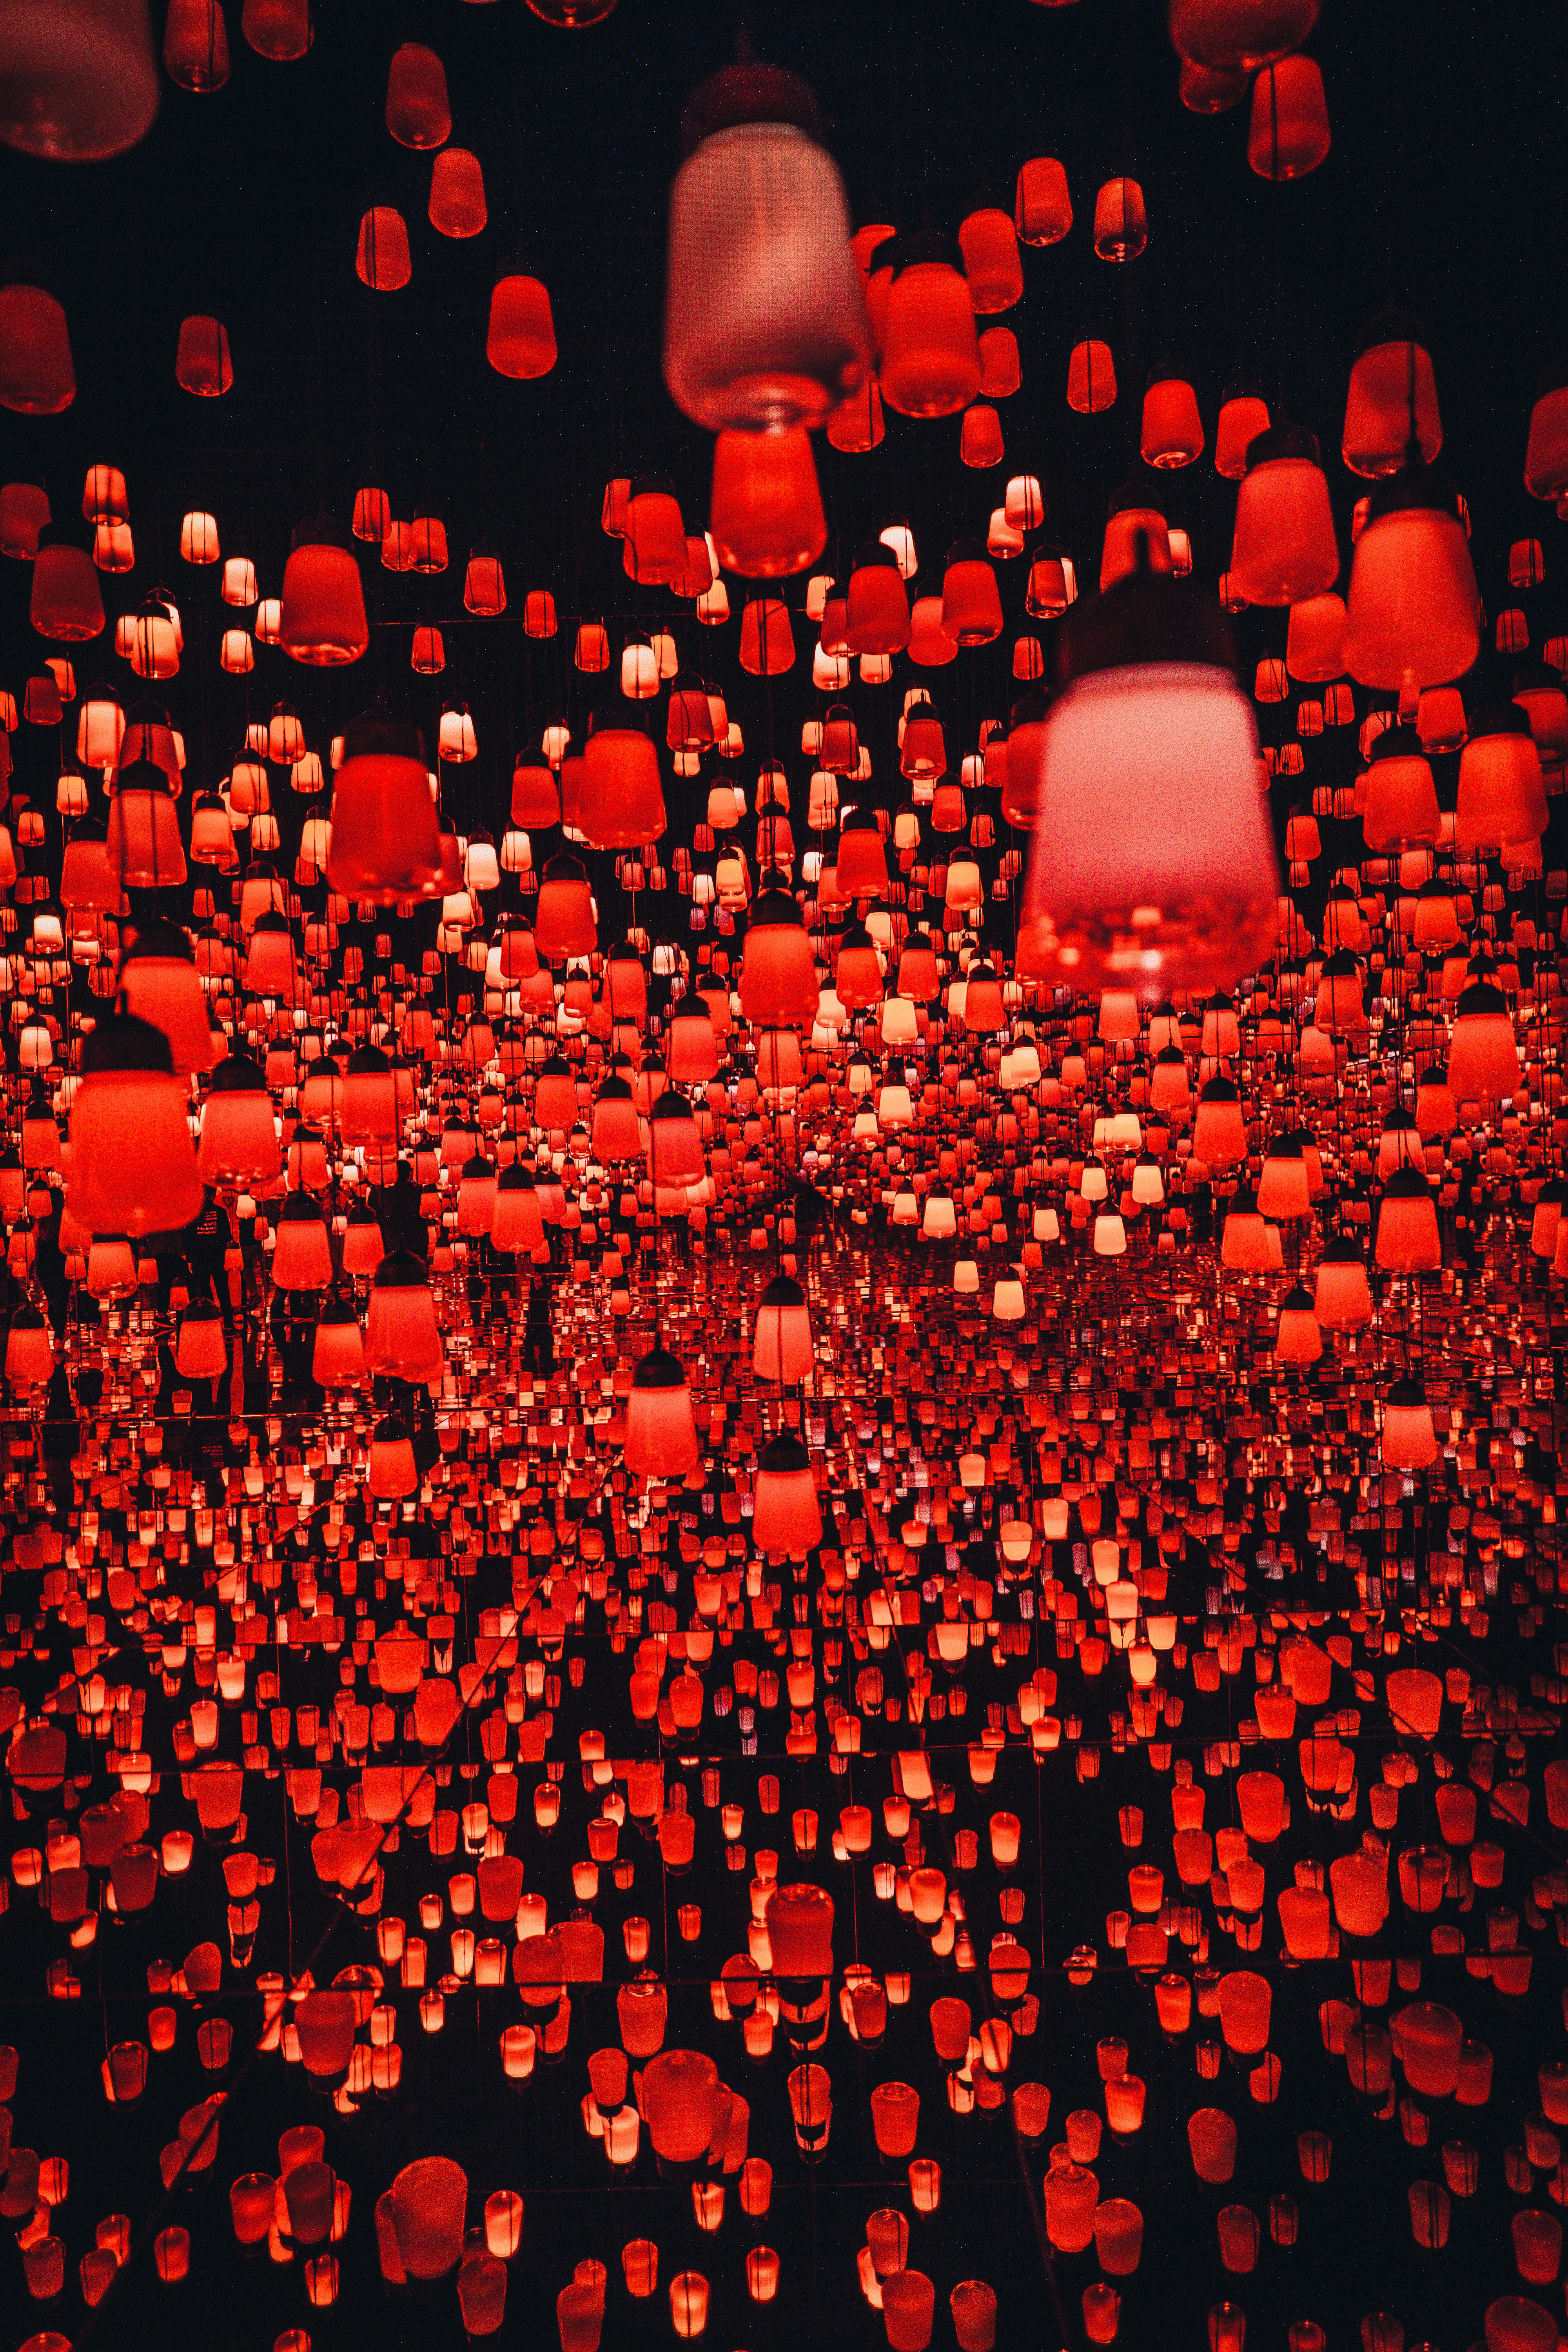 android light, lights, red, shine, miscellanea, miscellaneous, lanterns, chinese lanterns